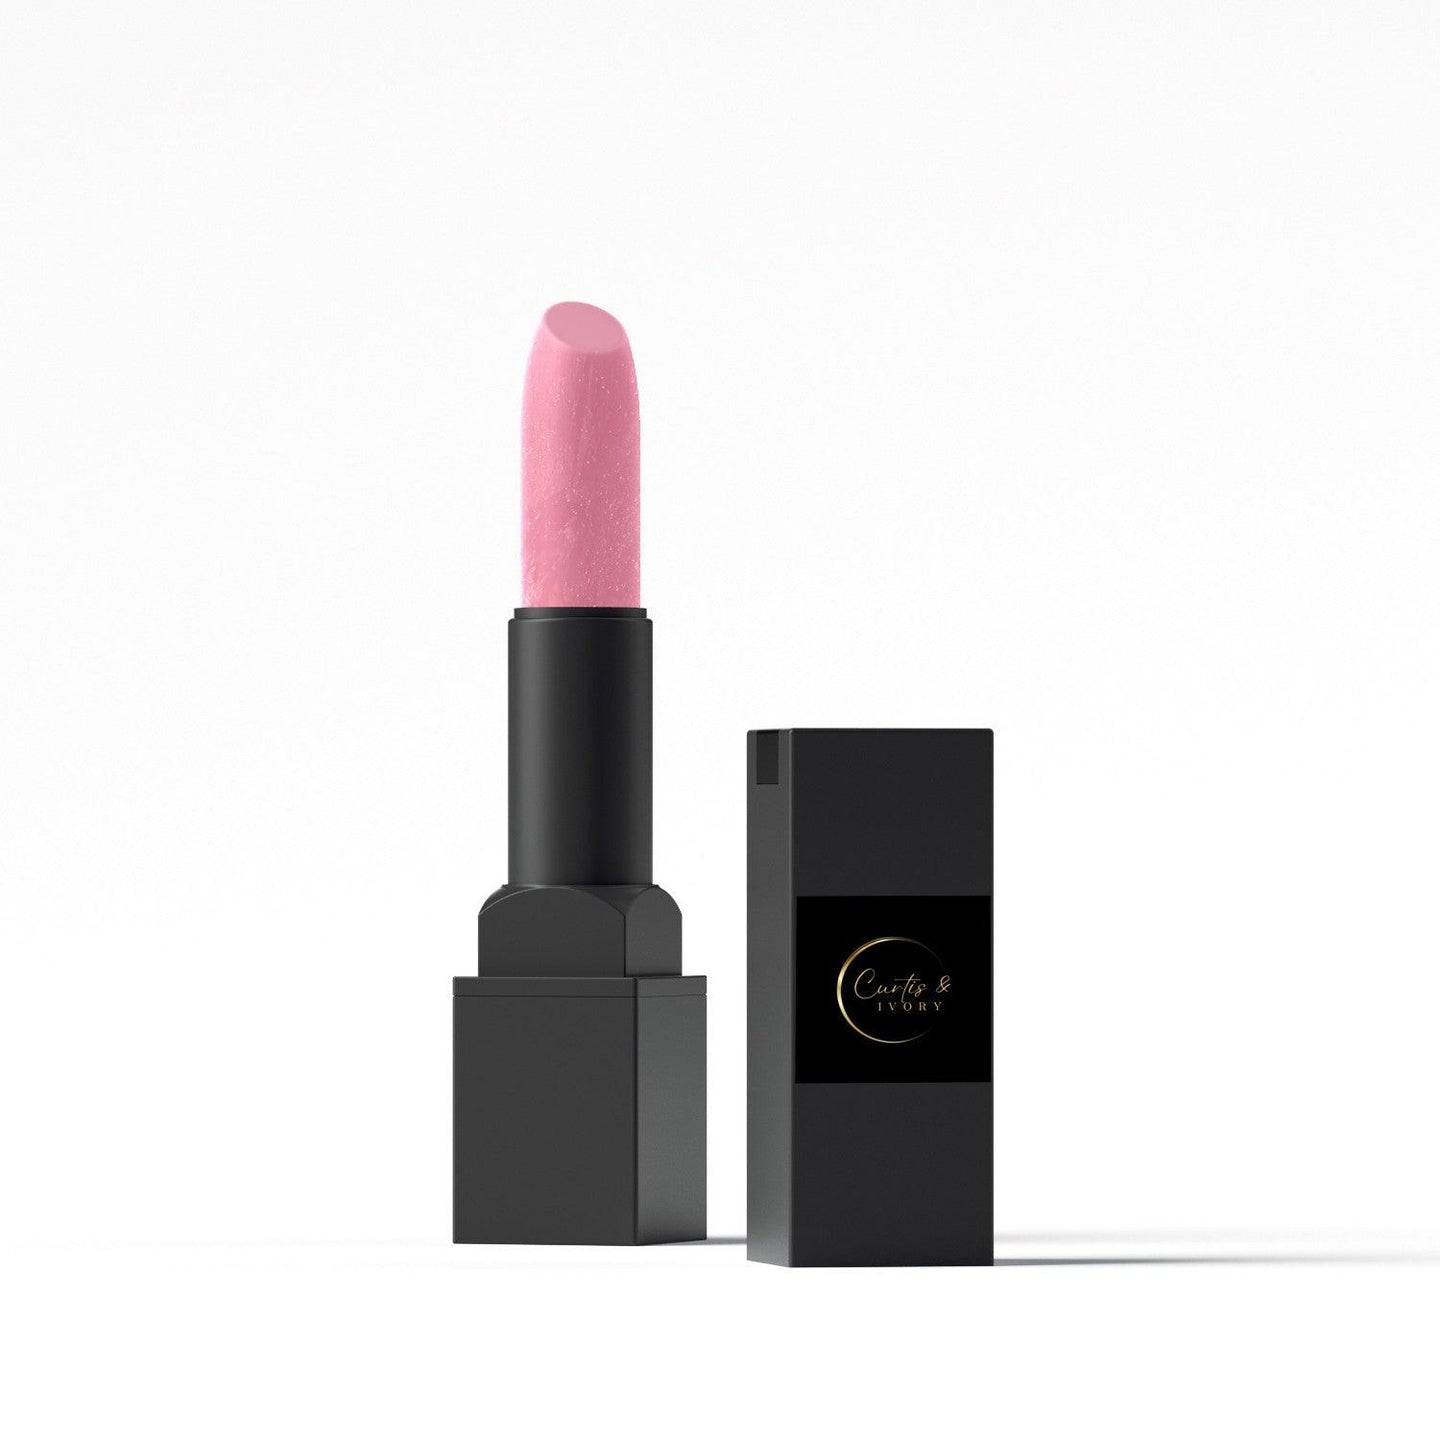 Curtis & Ivory Misty Pink Lipstick.The creamy texture adds a silky lightweight stain specifically formulated for comfort. - Curtis & Ivory